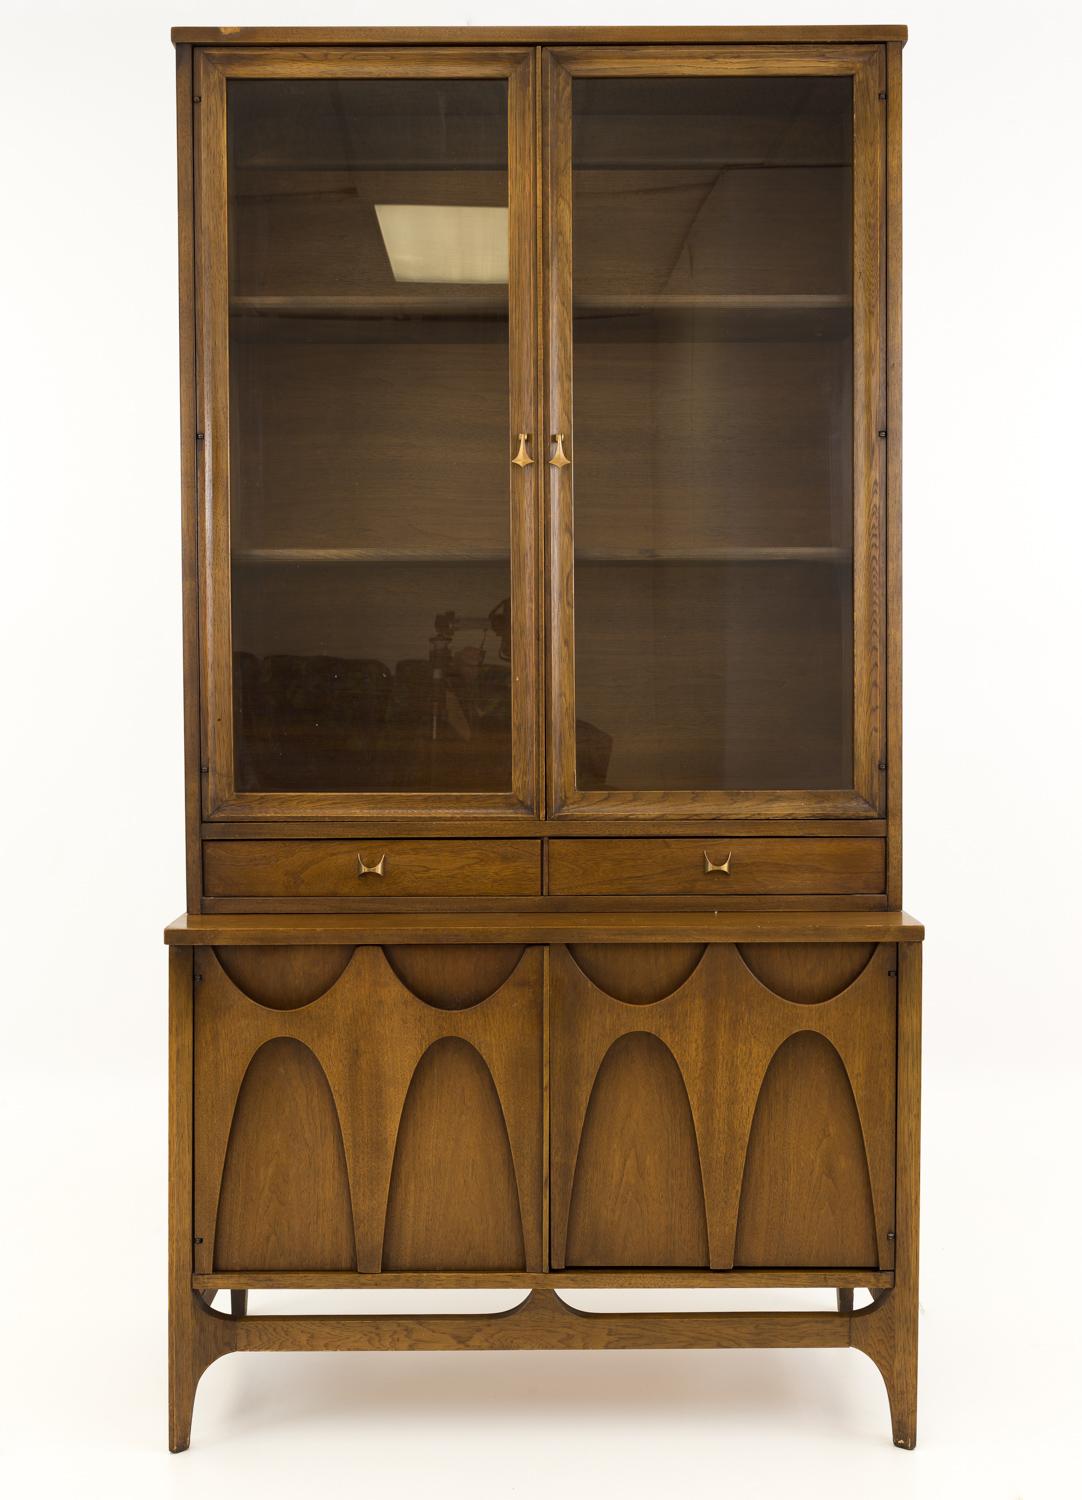 Broyhill Brasilia mid century buffet China cabinet

This china cabinet measures: 37 wide x 17 deep x 26 high without hutch and the hutch itself is 36.5 wide x 12.5 deep x 48 high for a total overall height of 74 inches

All pieces of furniture